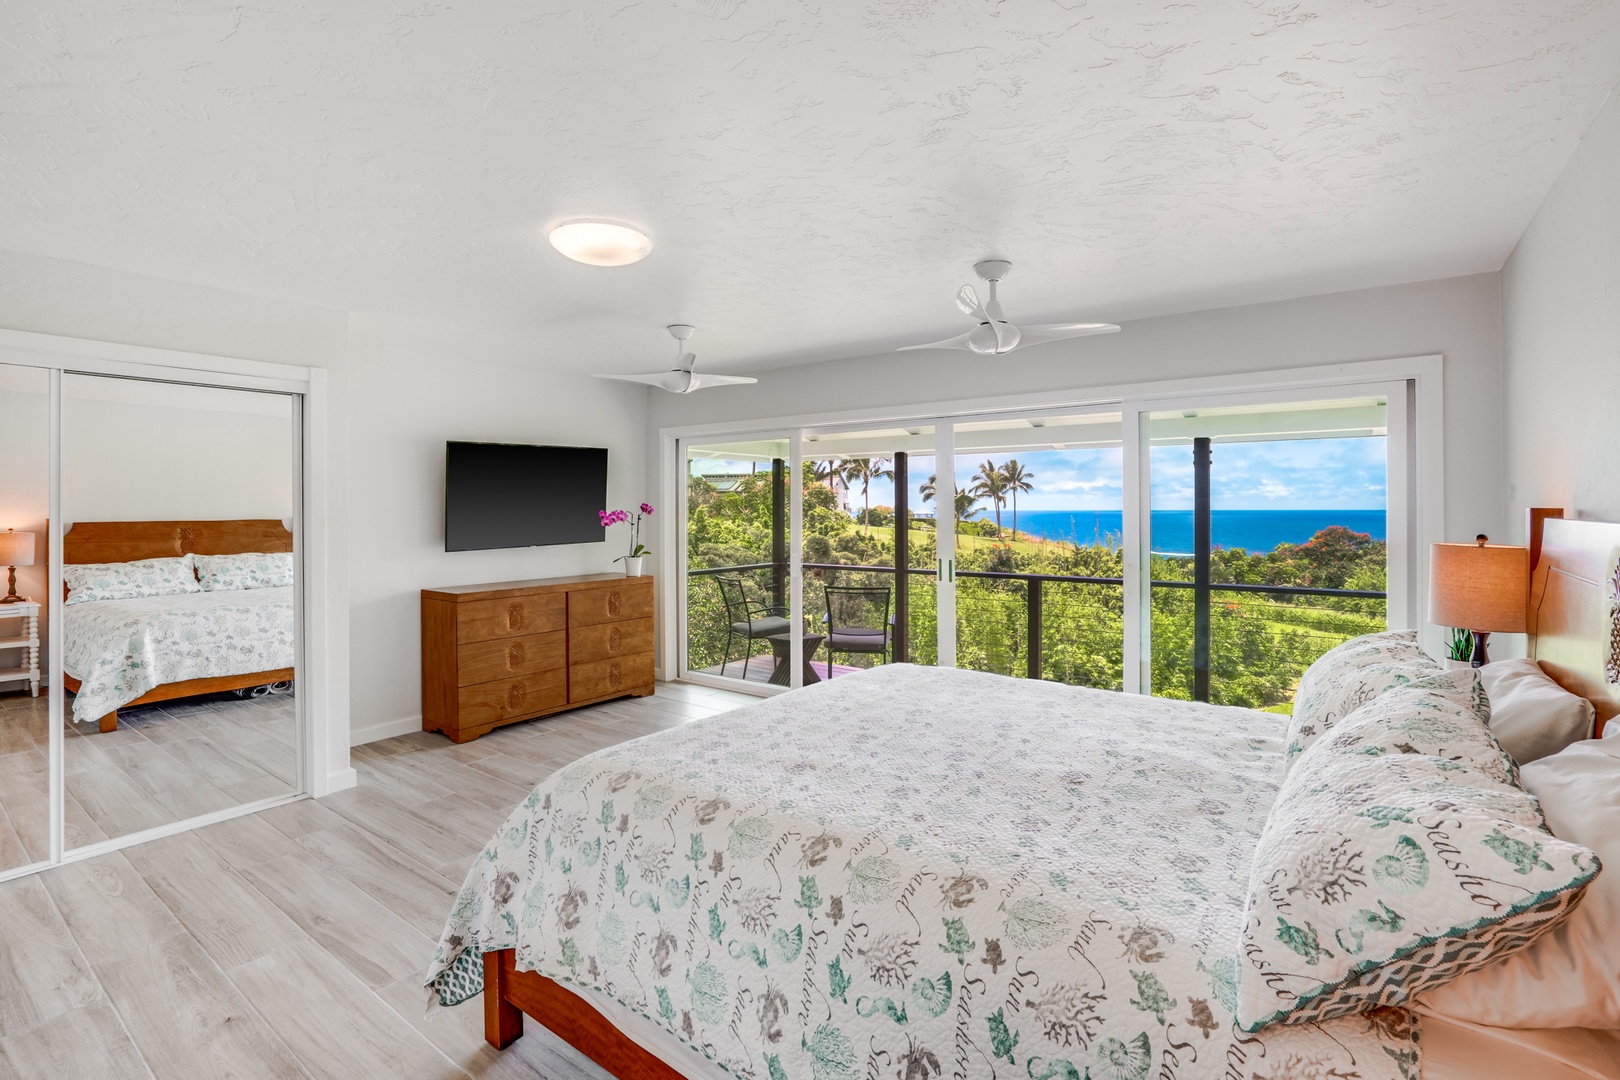 Princeville Vacation Rentals, Wai Lani - Guest suite 2 with TV, a private lanai, and panoramic views